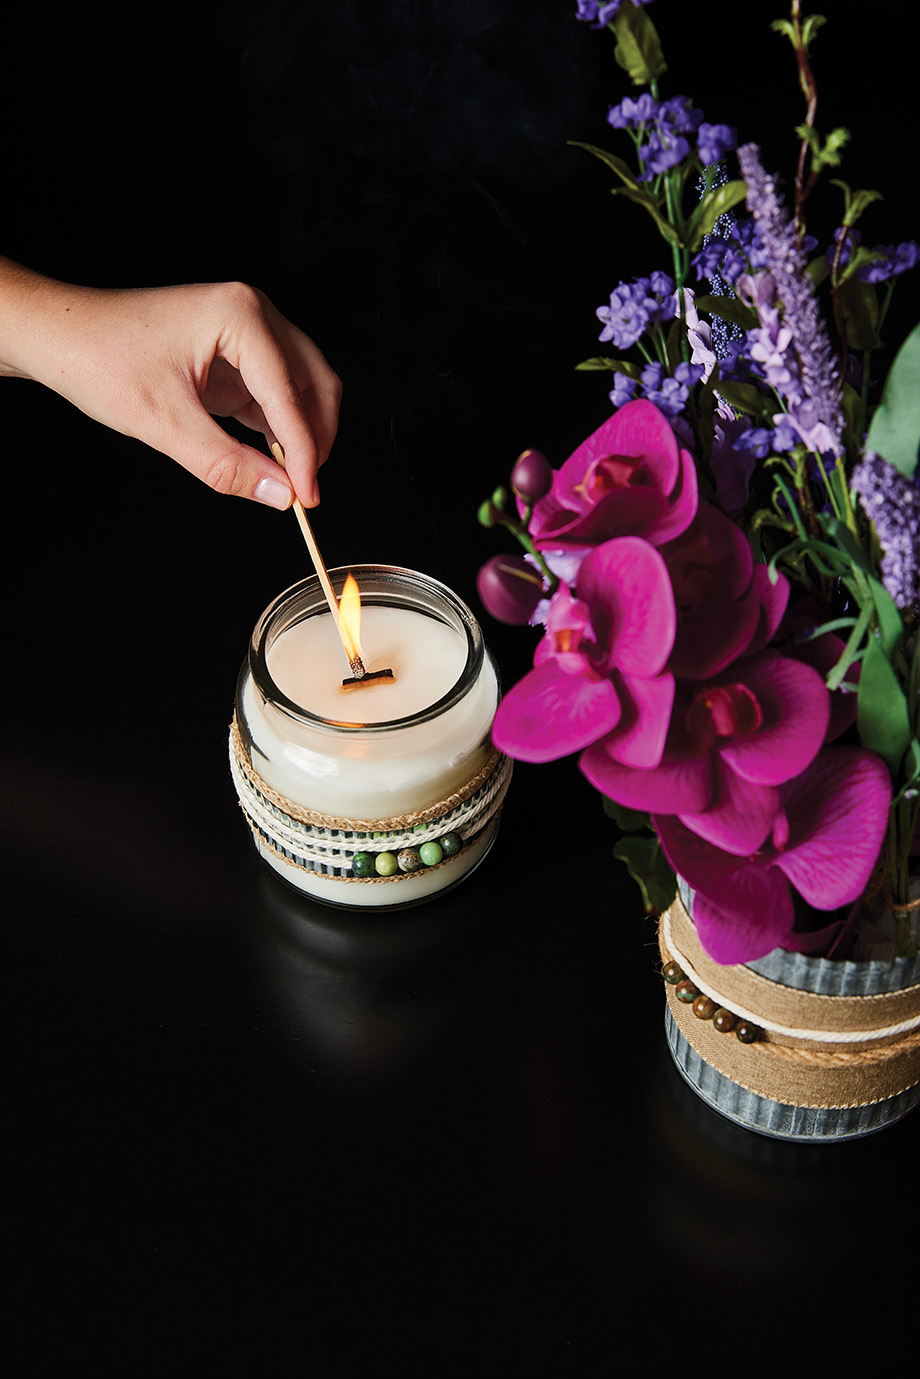 Hand lighting a Blooming Brightly candle.